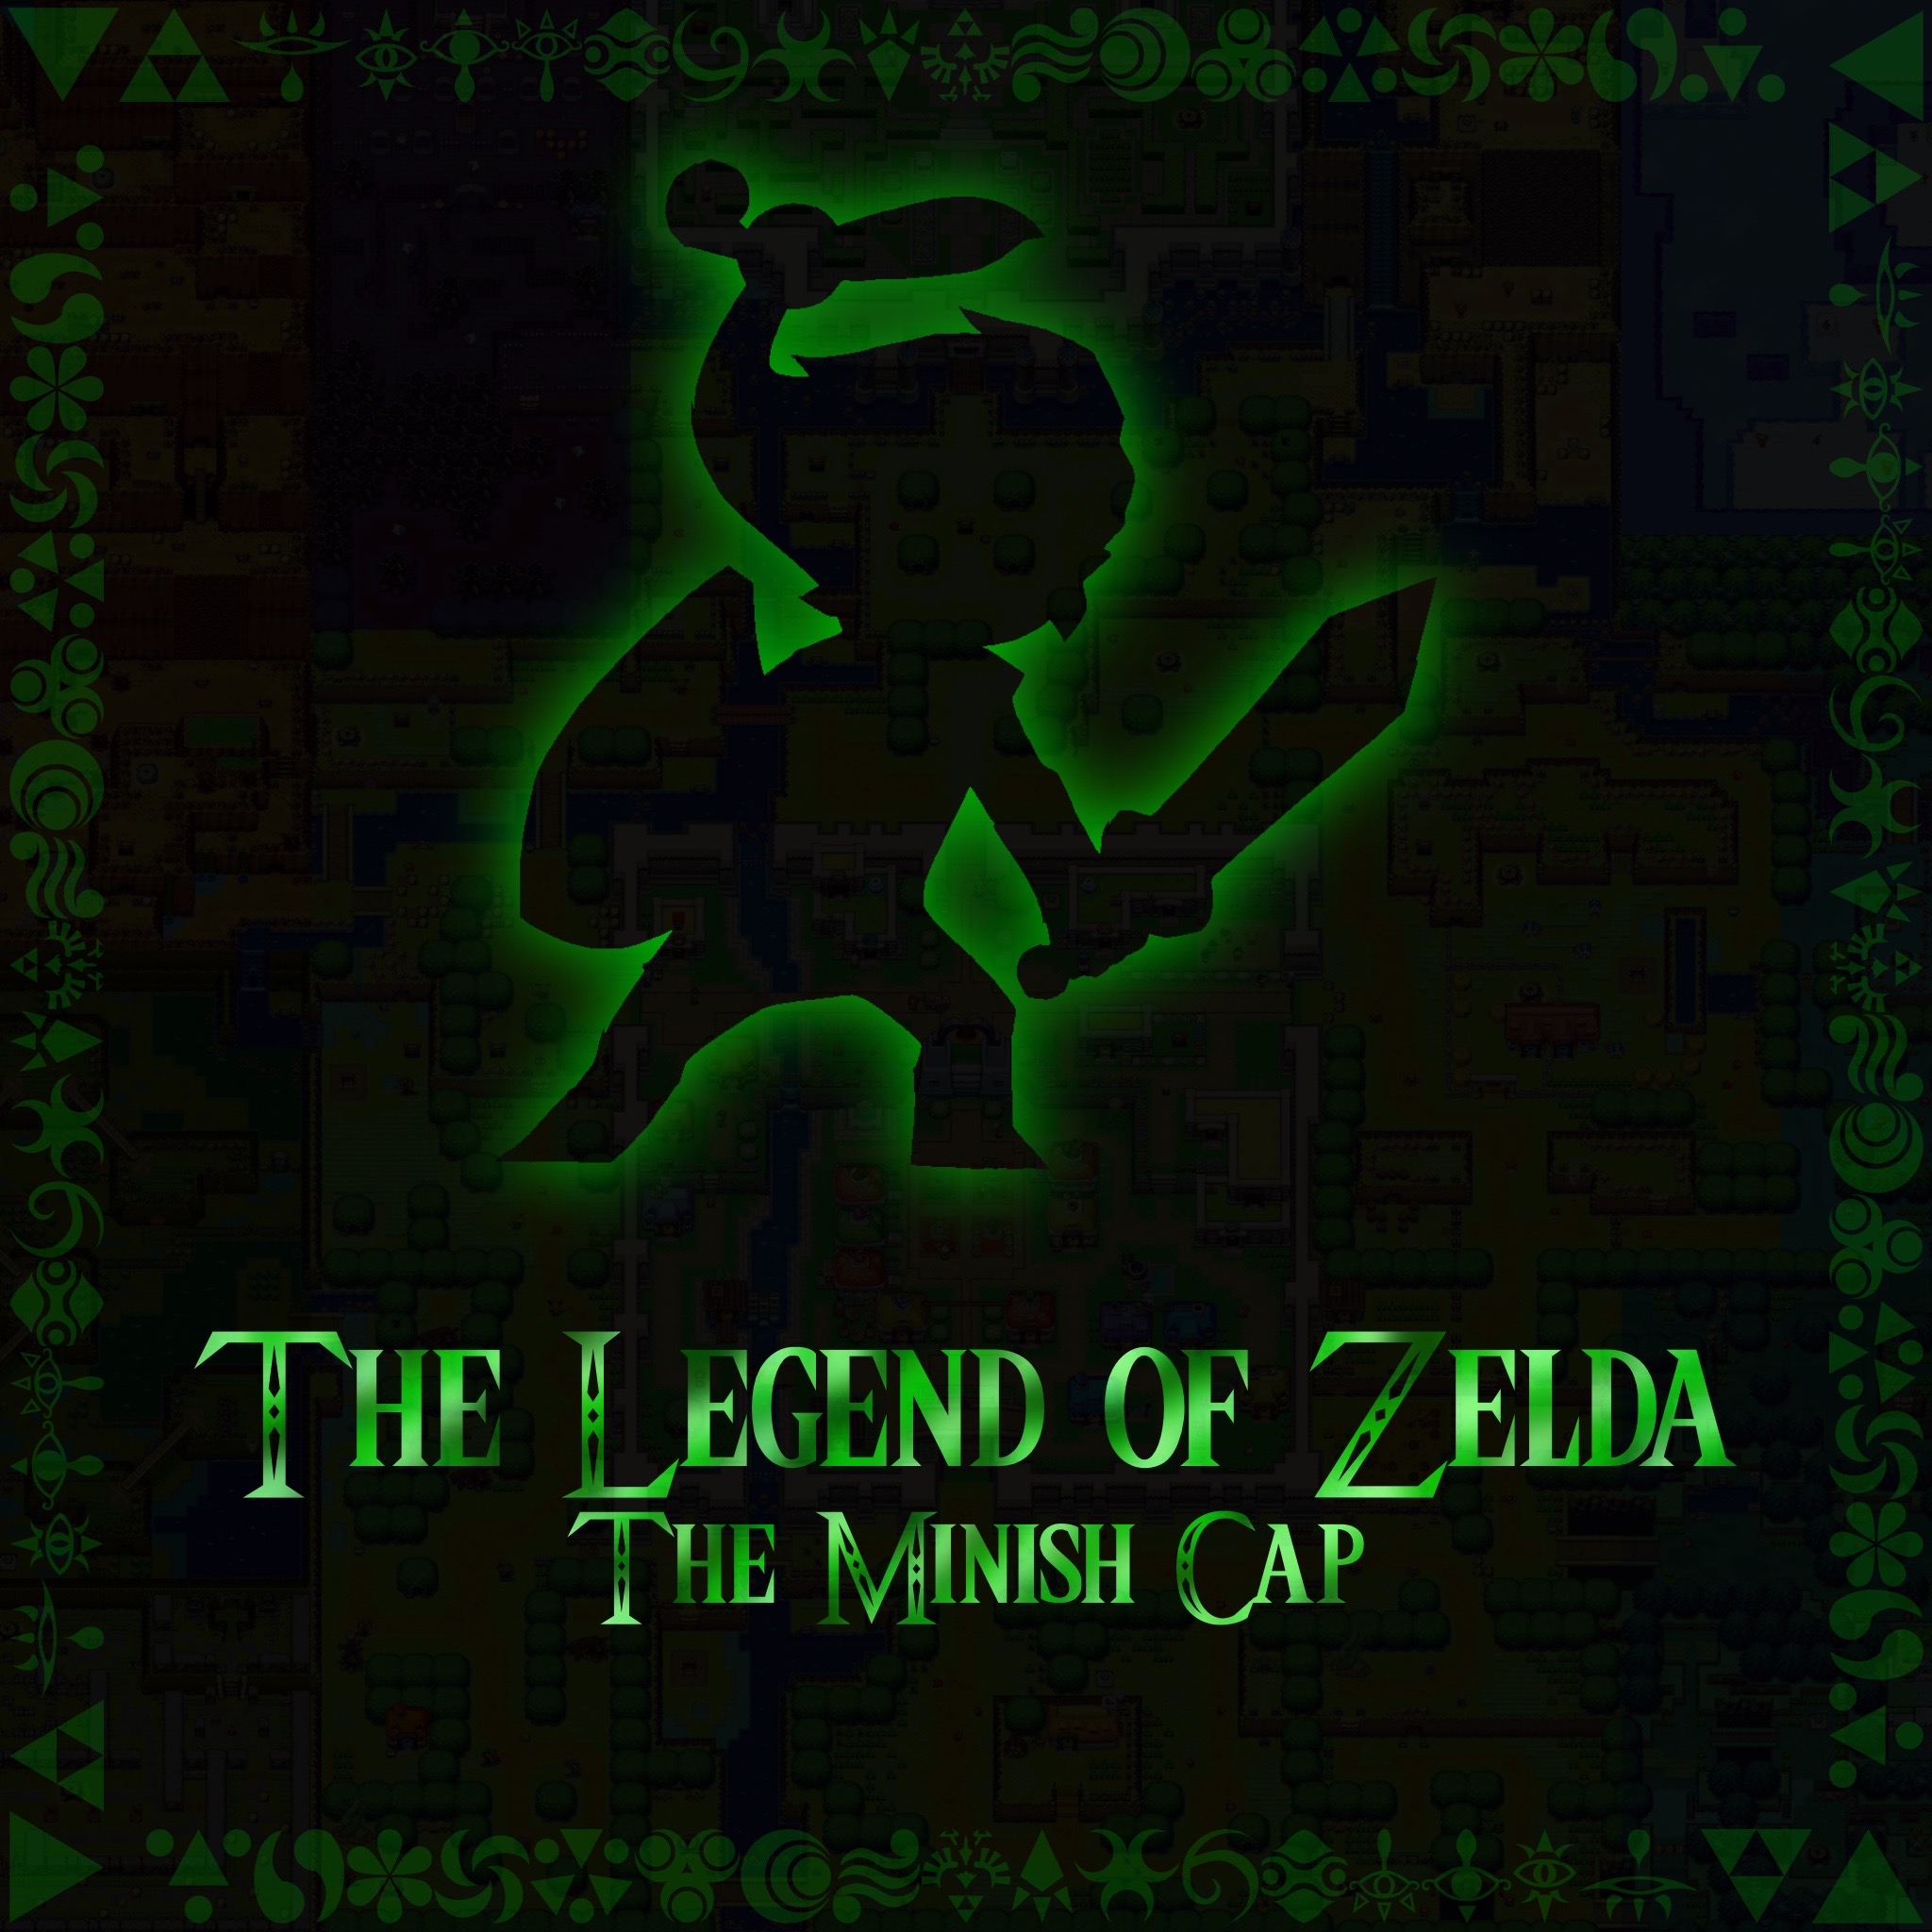 The Legend of Zelda: A Link to the Past (GBA) by bryanthearchivist